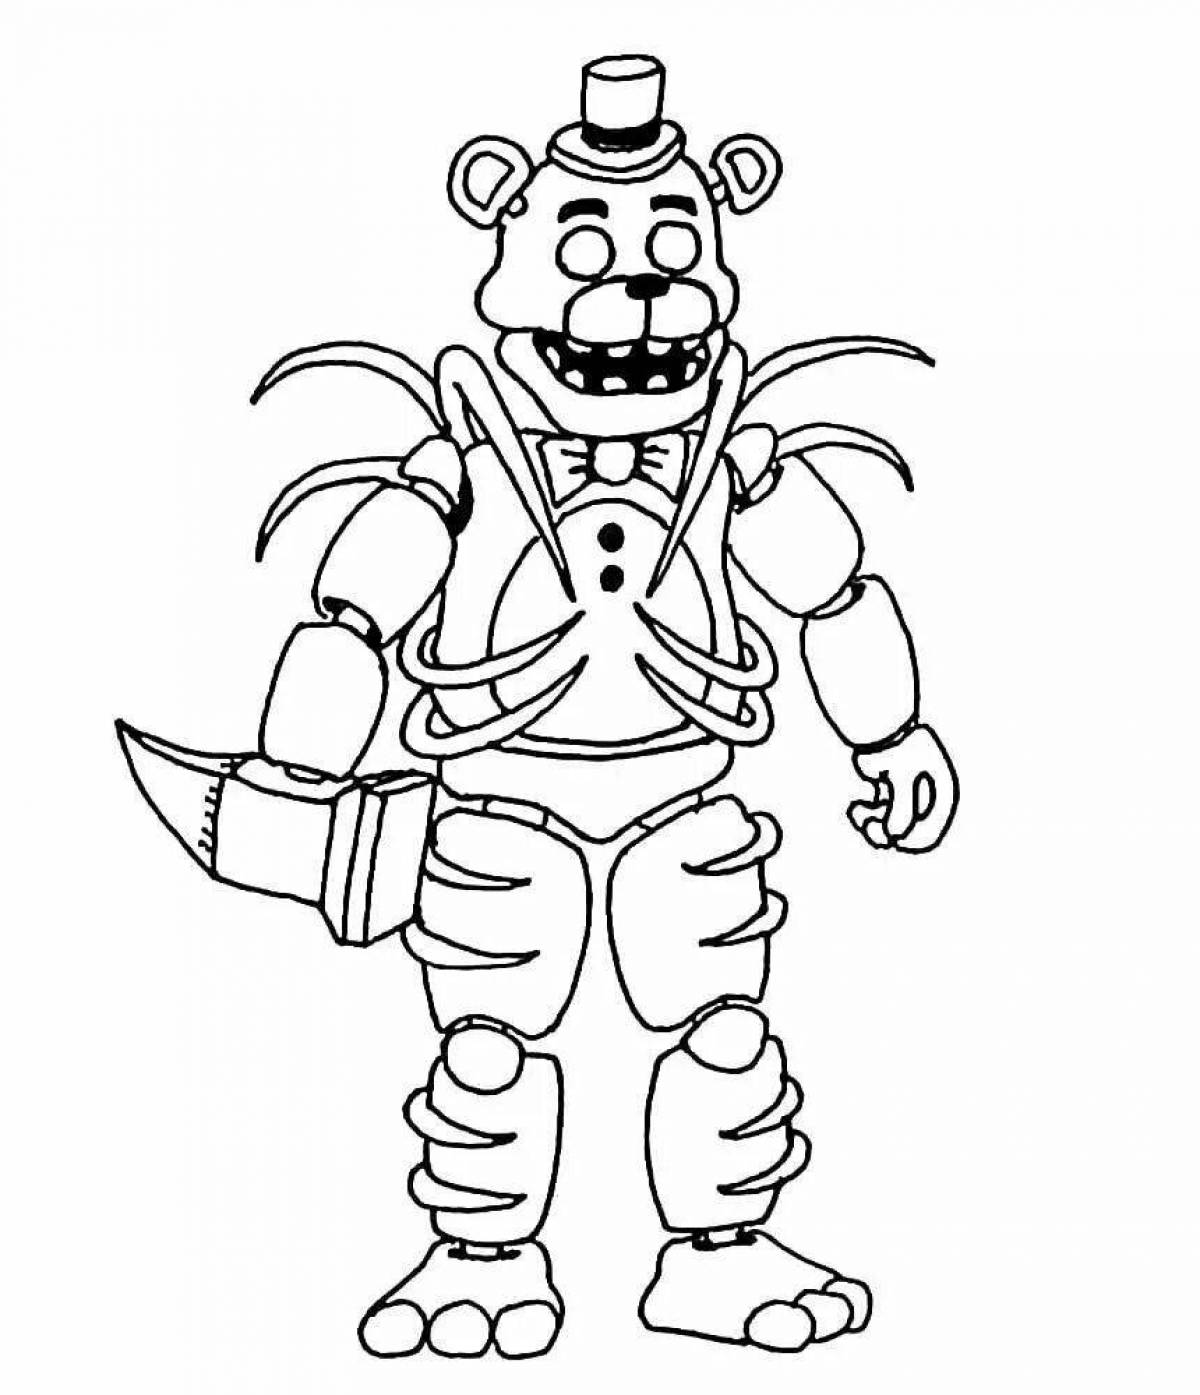 Shiny Glam Rock Bonnie Coloring Page